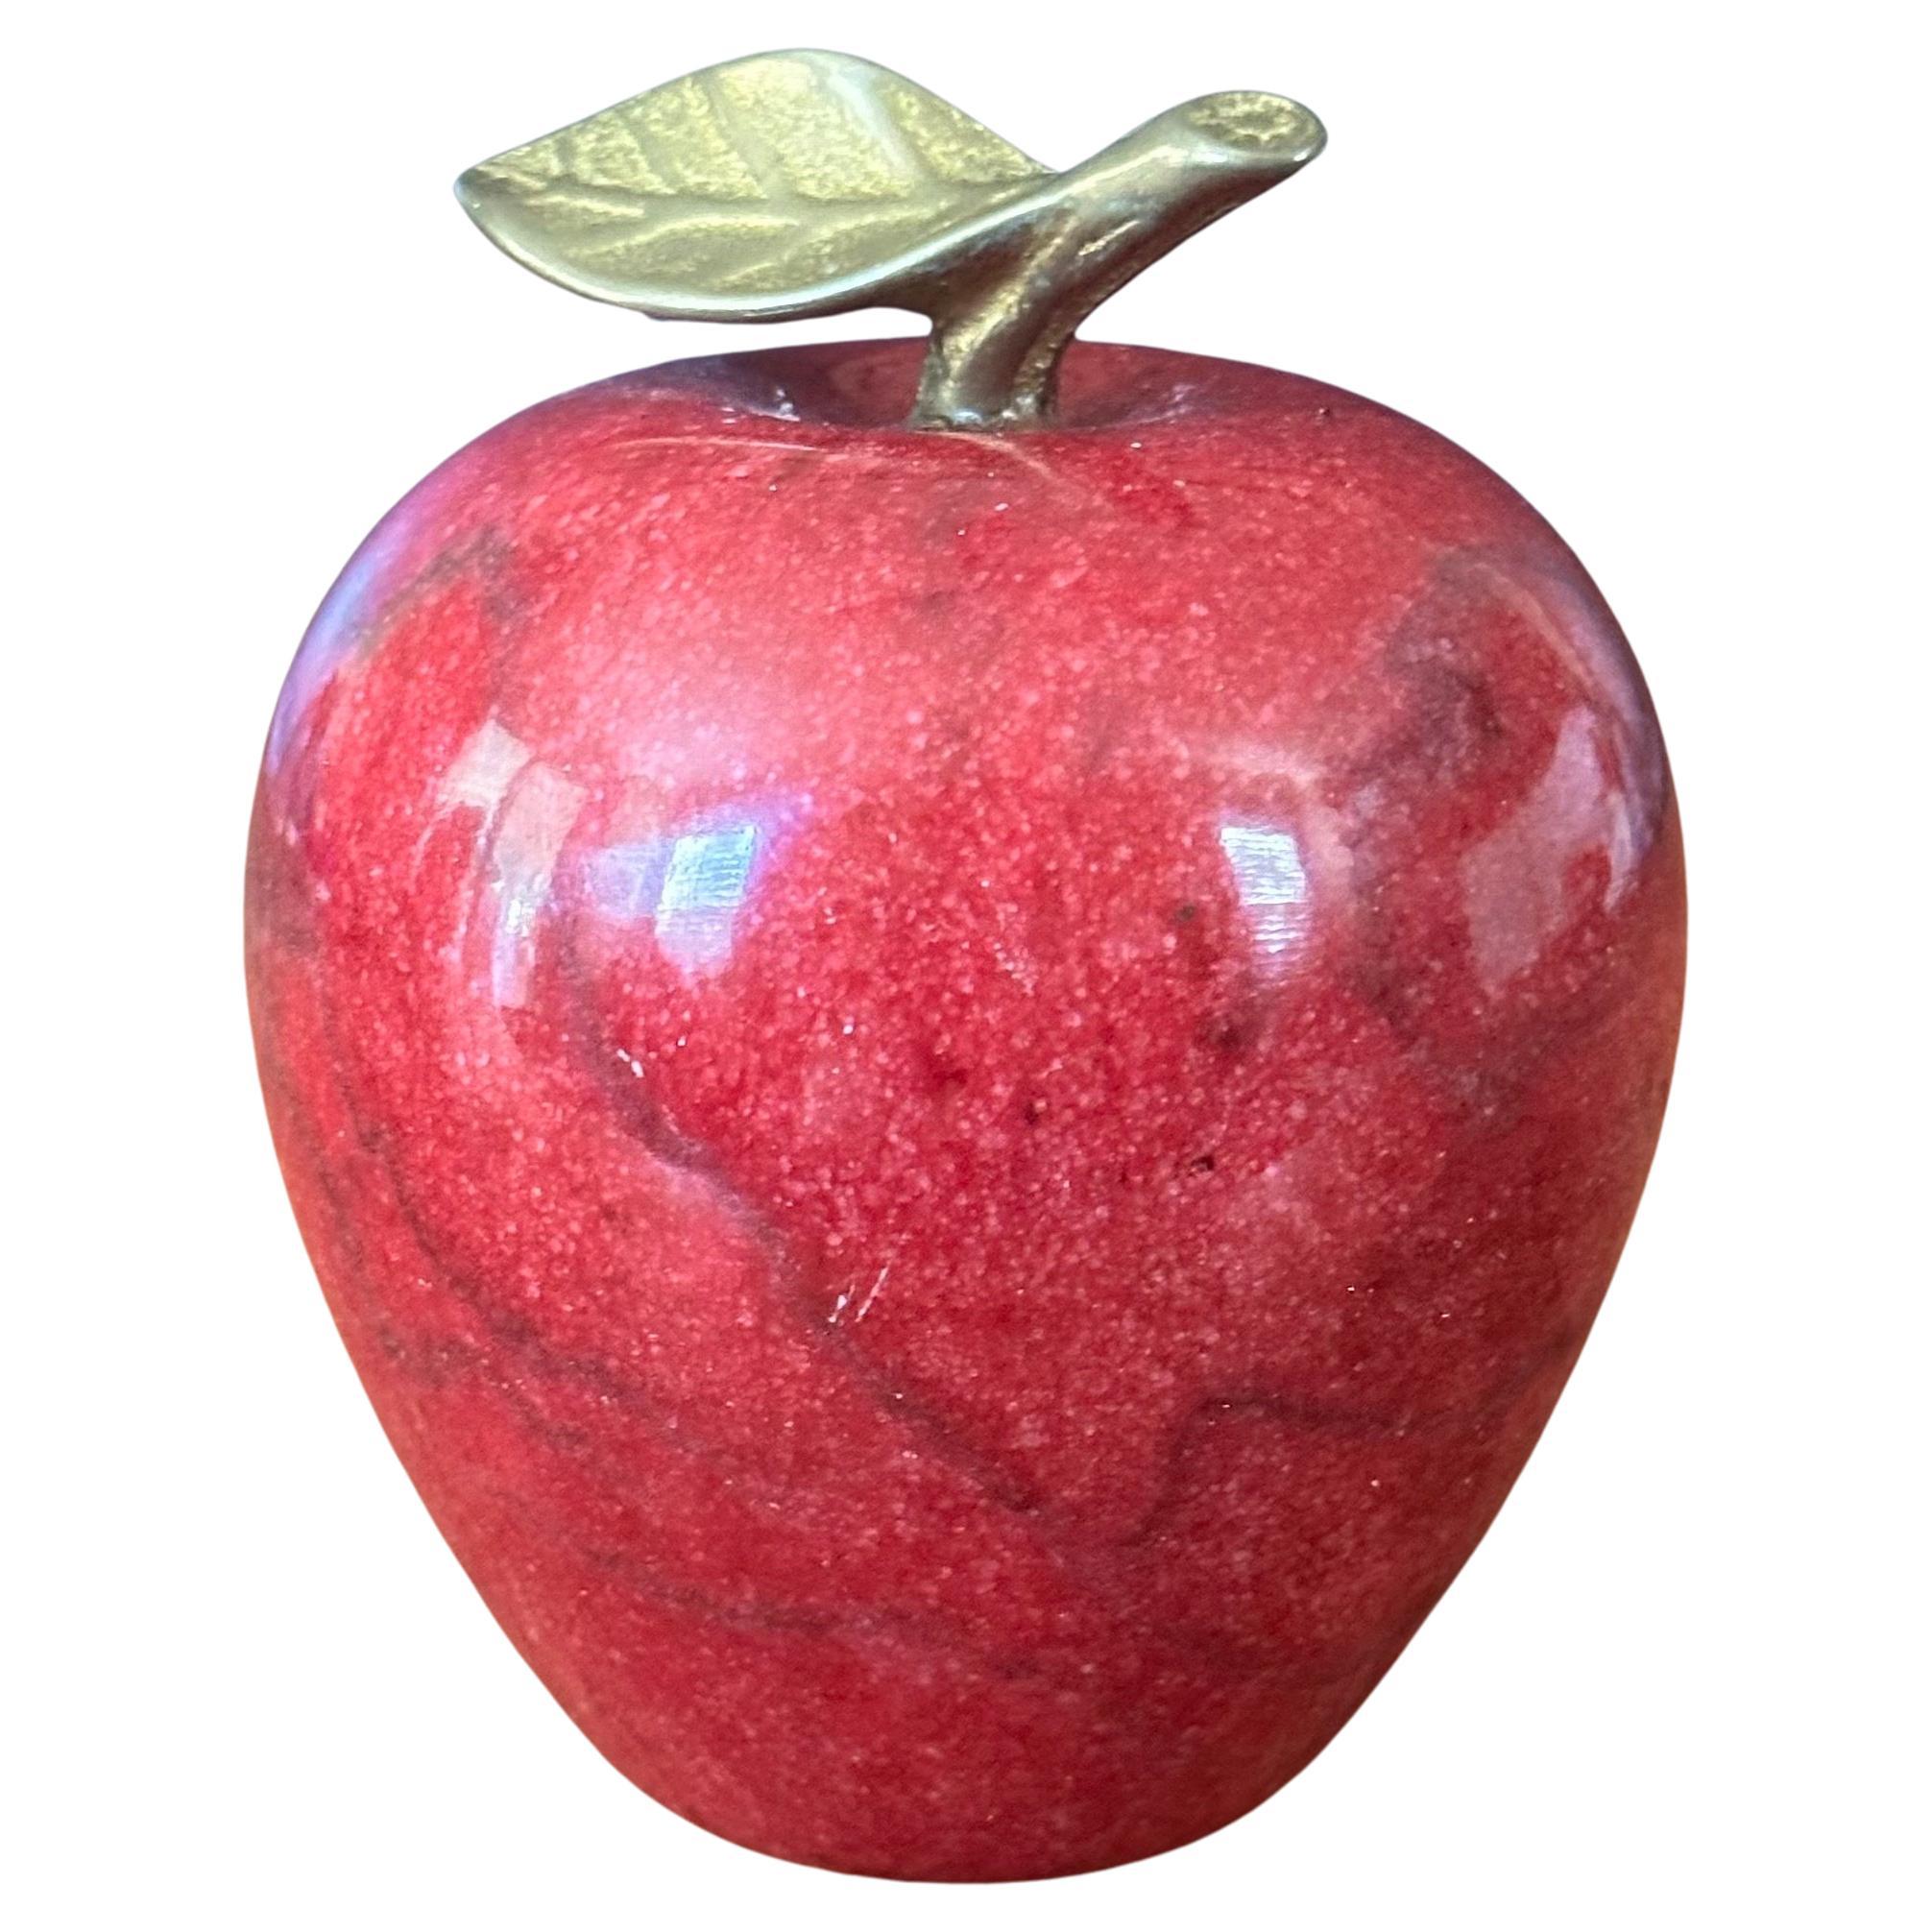 Solid Red Marble Apple Paperweight with Brass Stem